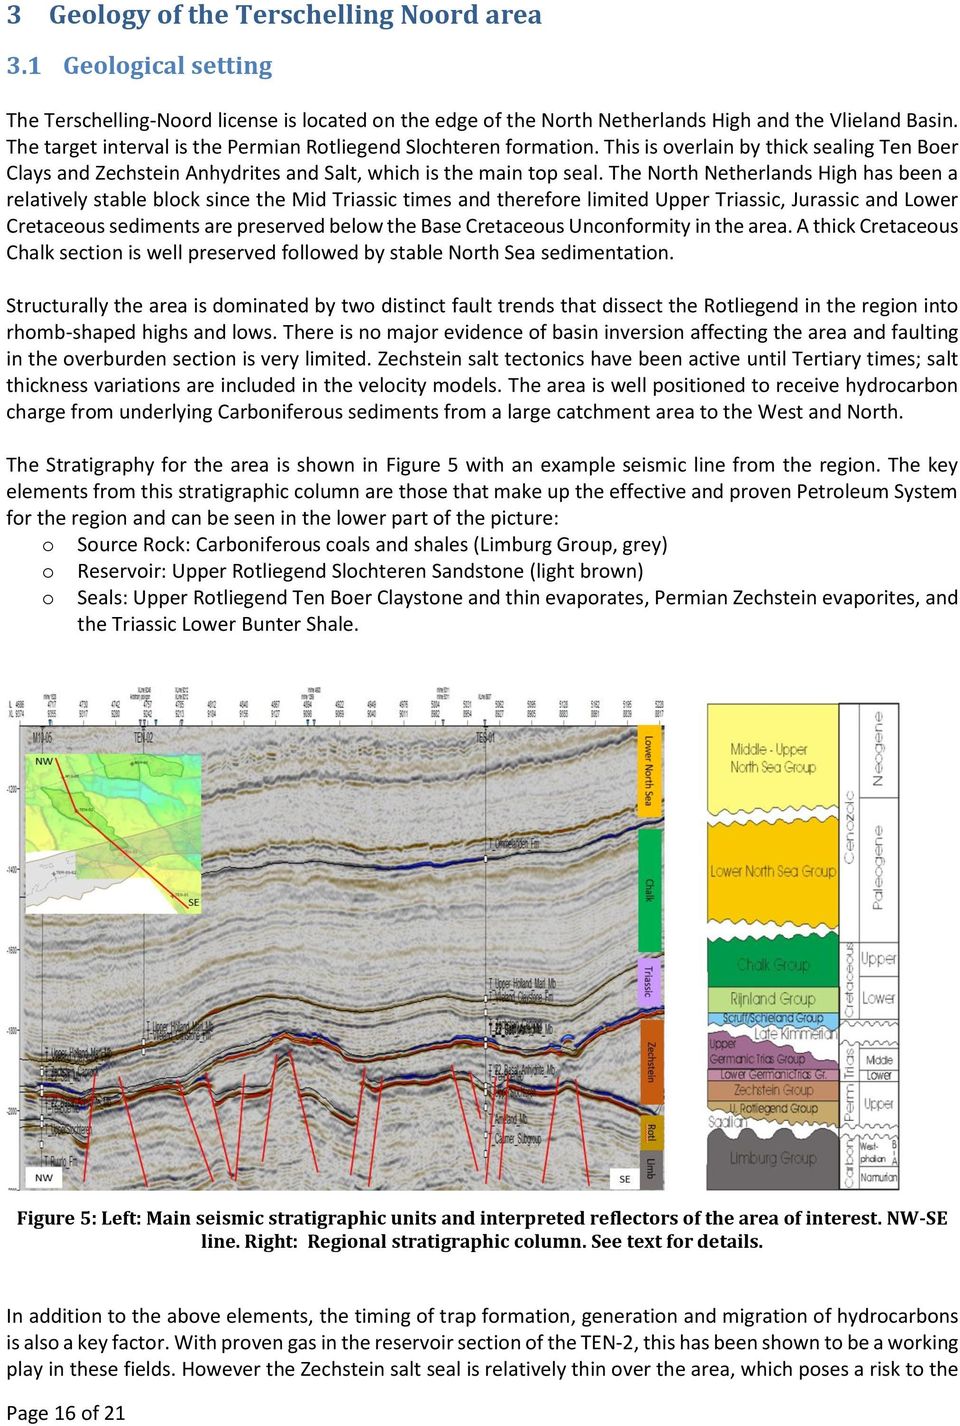 The North Netherlands High has been a relatively stable block since the Mid Triassic times and therefore limited Upper Triassic, Jurassic and Lower Cretaceous sediments are preserved below the Base